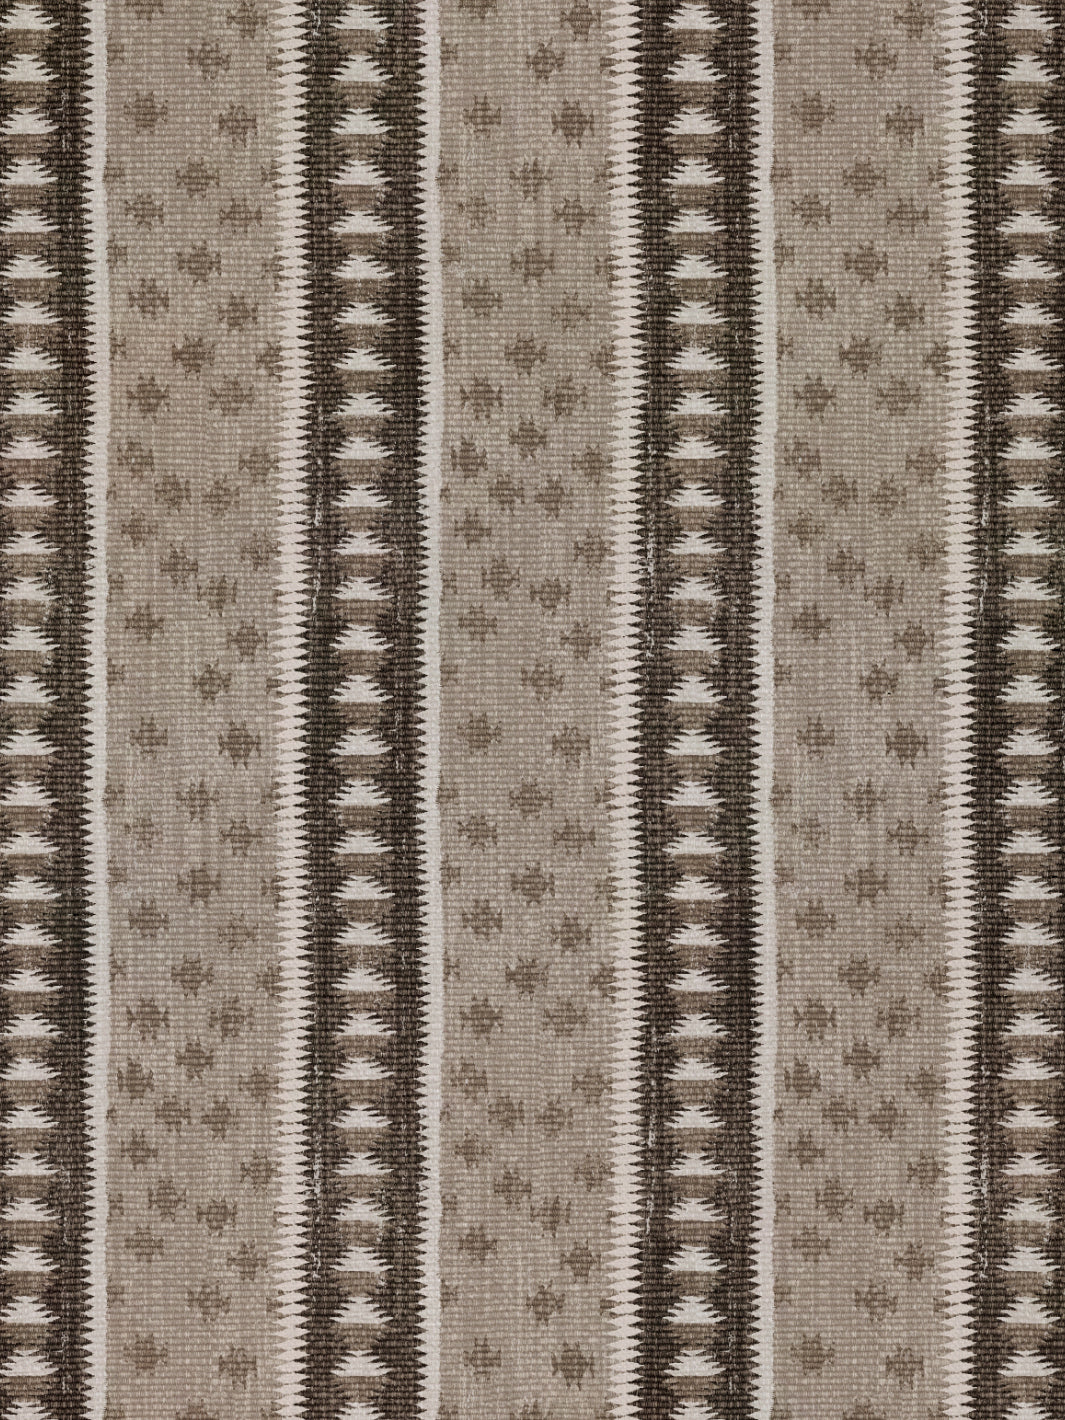 'Northstar Stripe' Linen Fabric by Nathan Turner - Brown